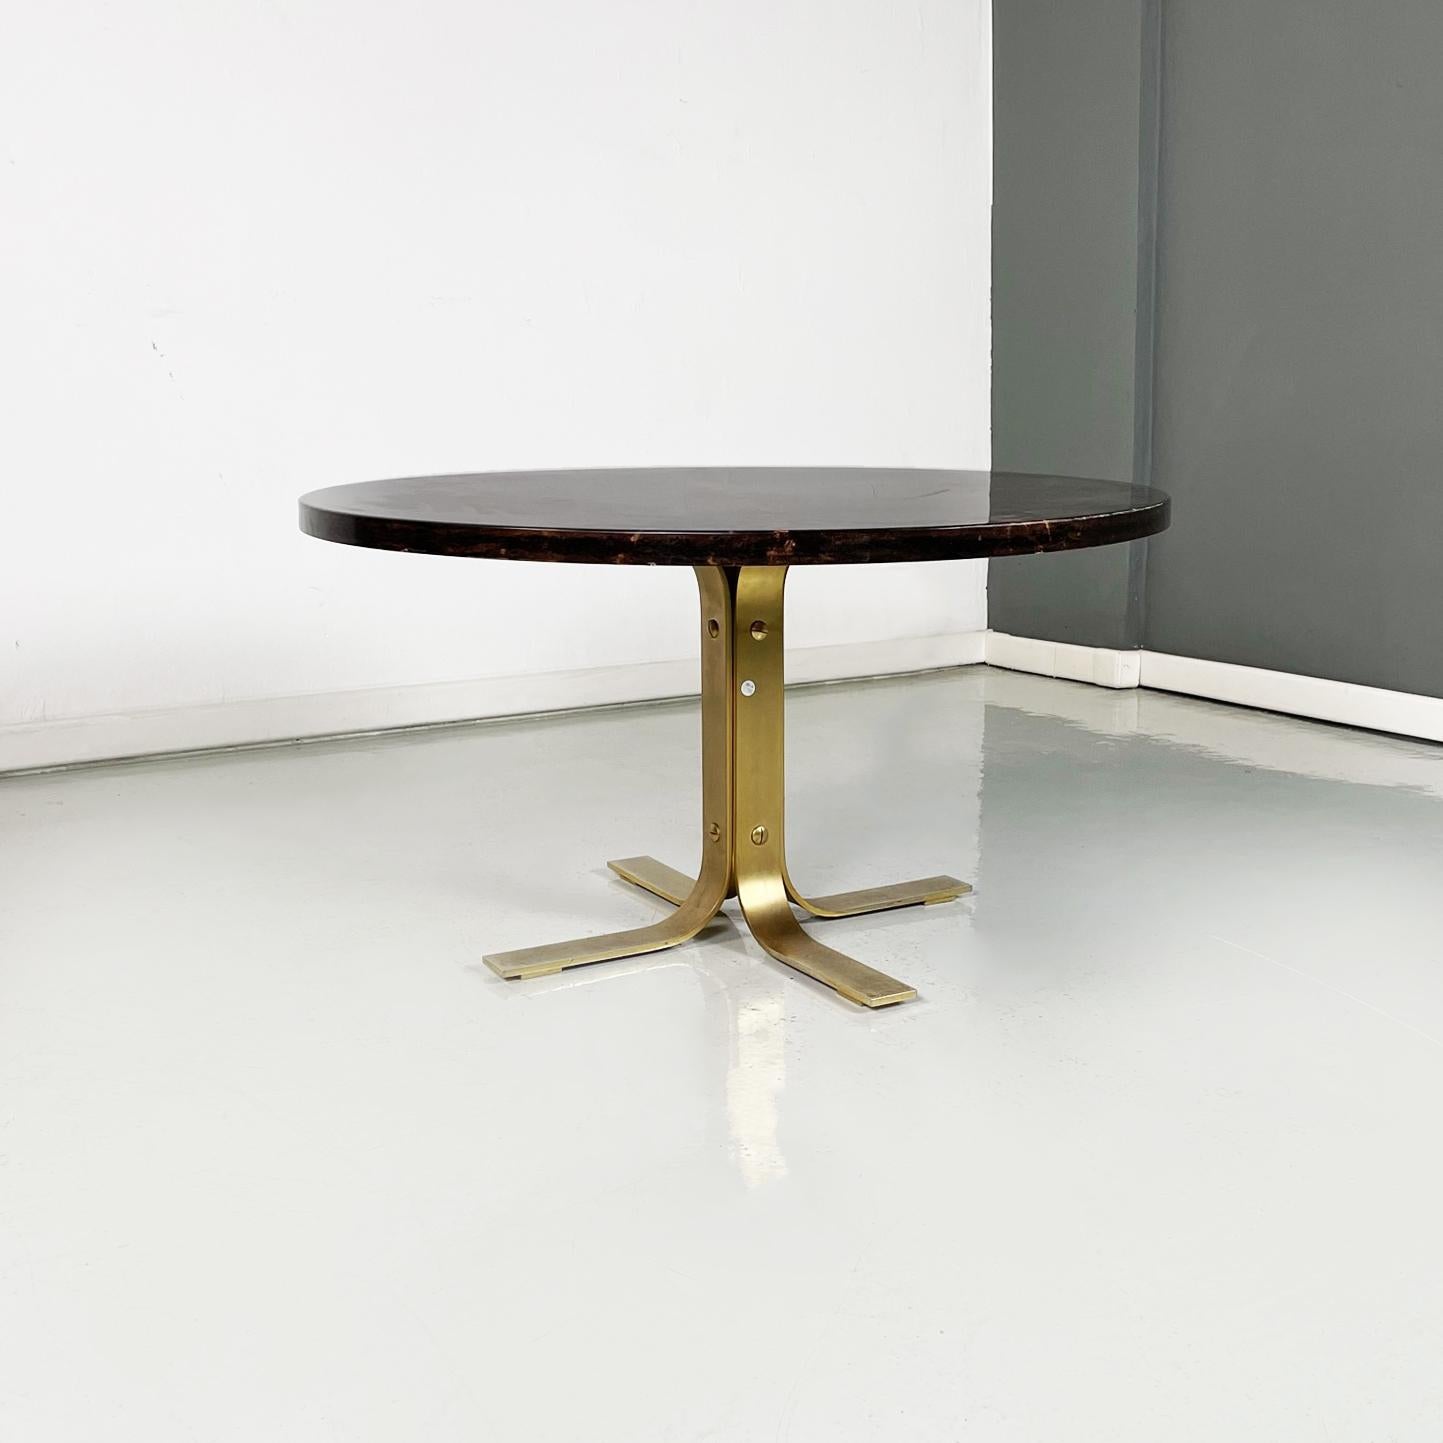 Italian Mid-Century Modern Coffee table in wood, parchment and brass by Aldo Tura, 1960s
Coffee table with round wooden top, covered in parchment with a dark brown finish. The 4-spoke base is made of brass.
Designed and produced by Aldo Tura in